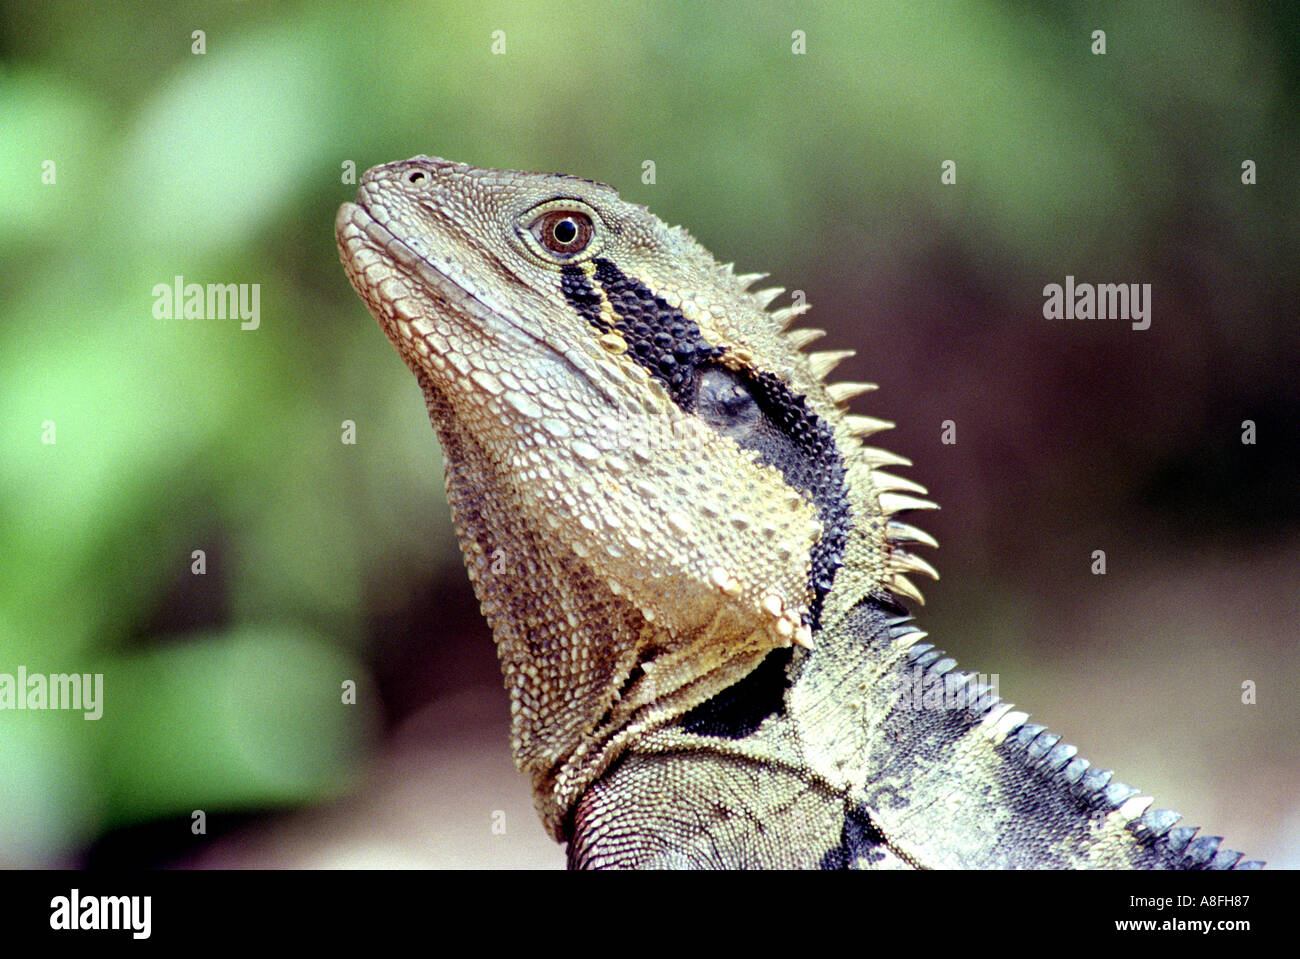 A CLOSE UP OF A WATER DRAGONS HEAD BAPN 438 Stock Photo